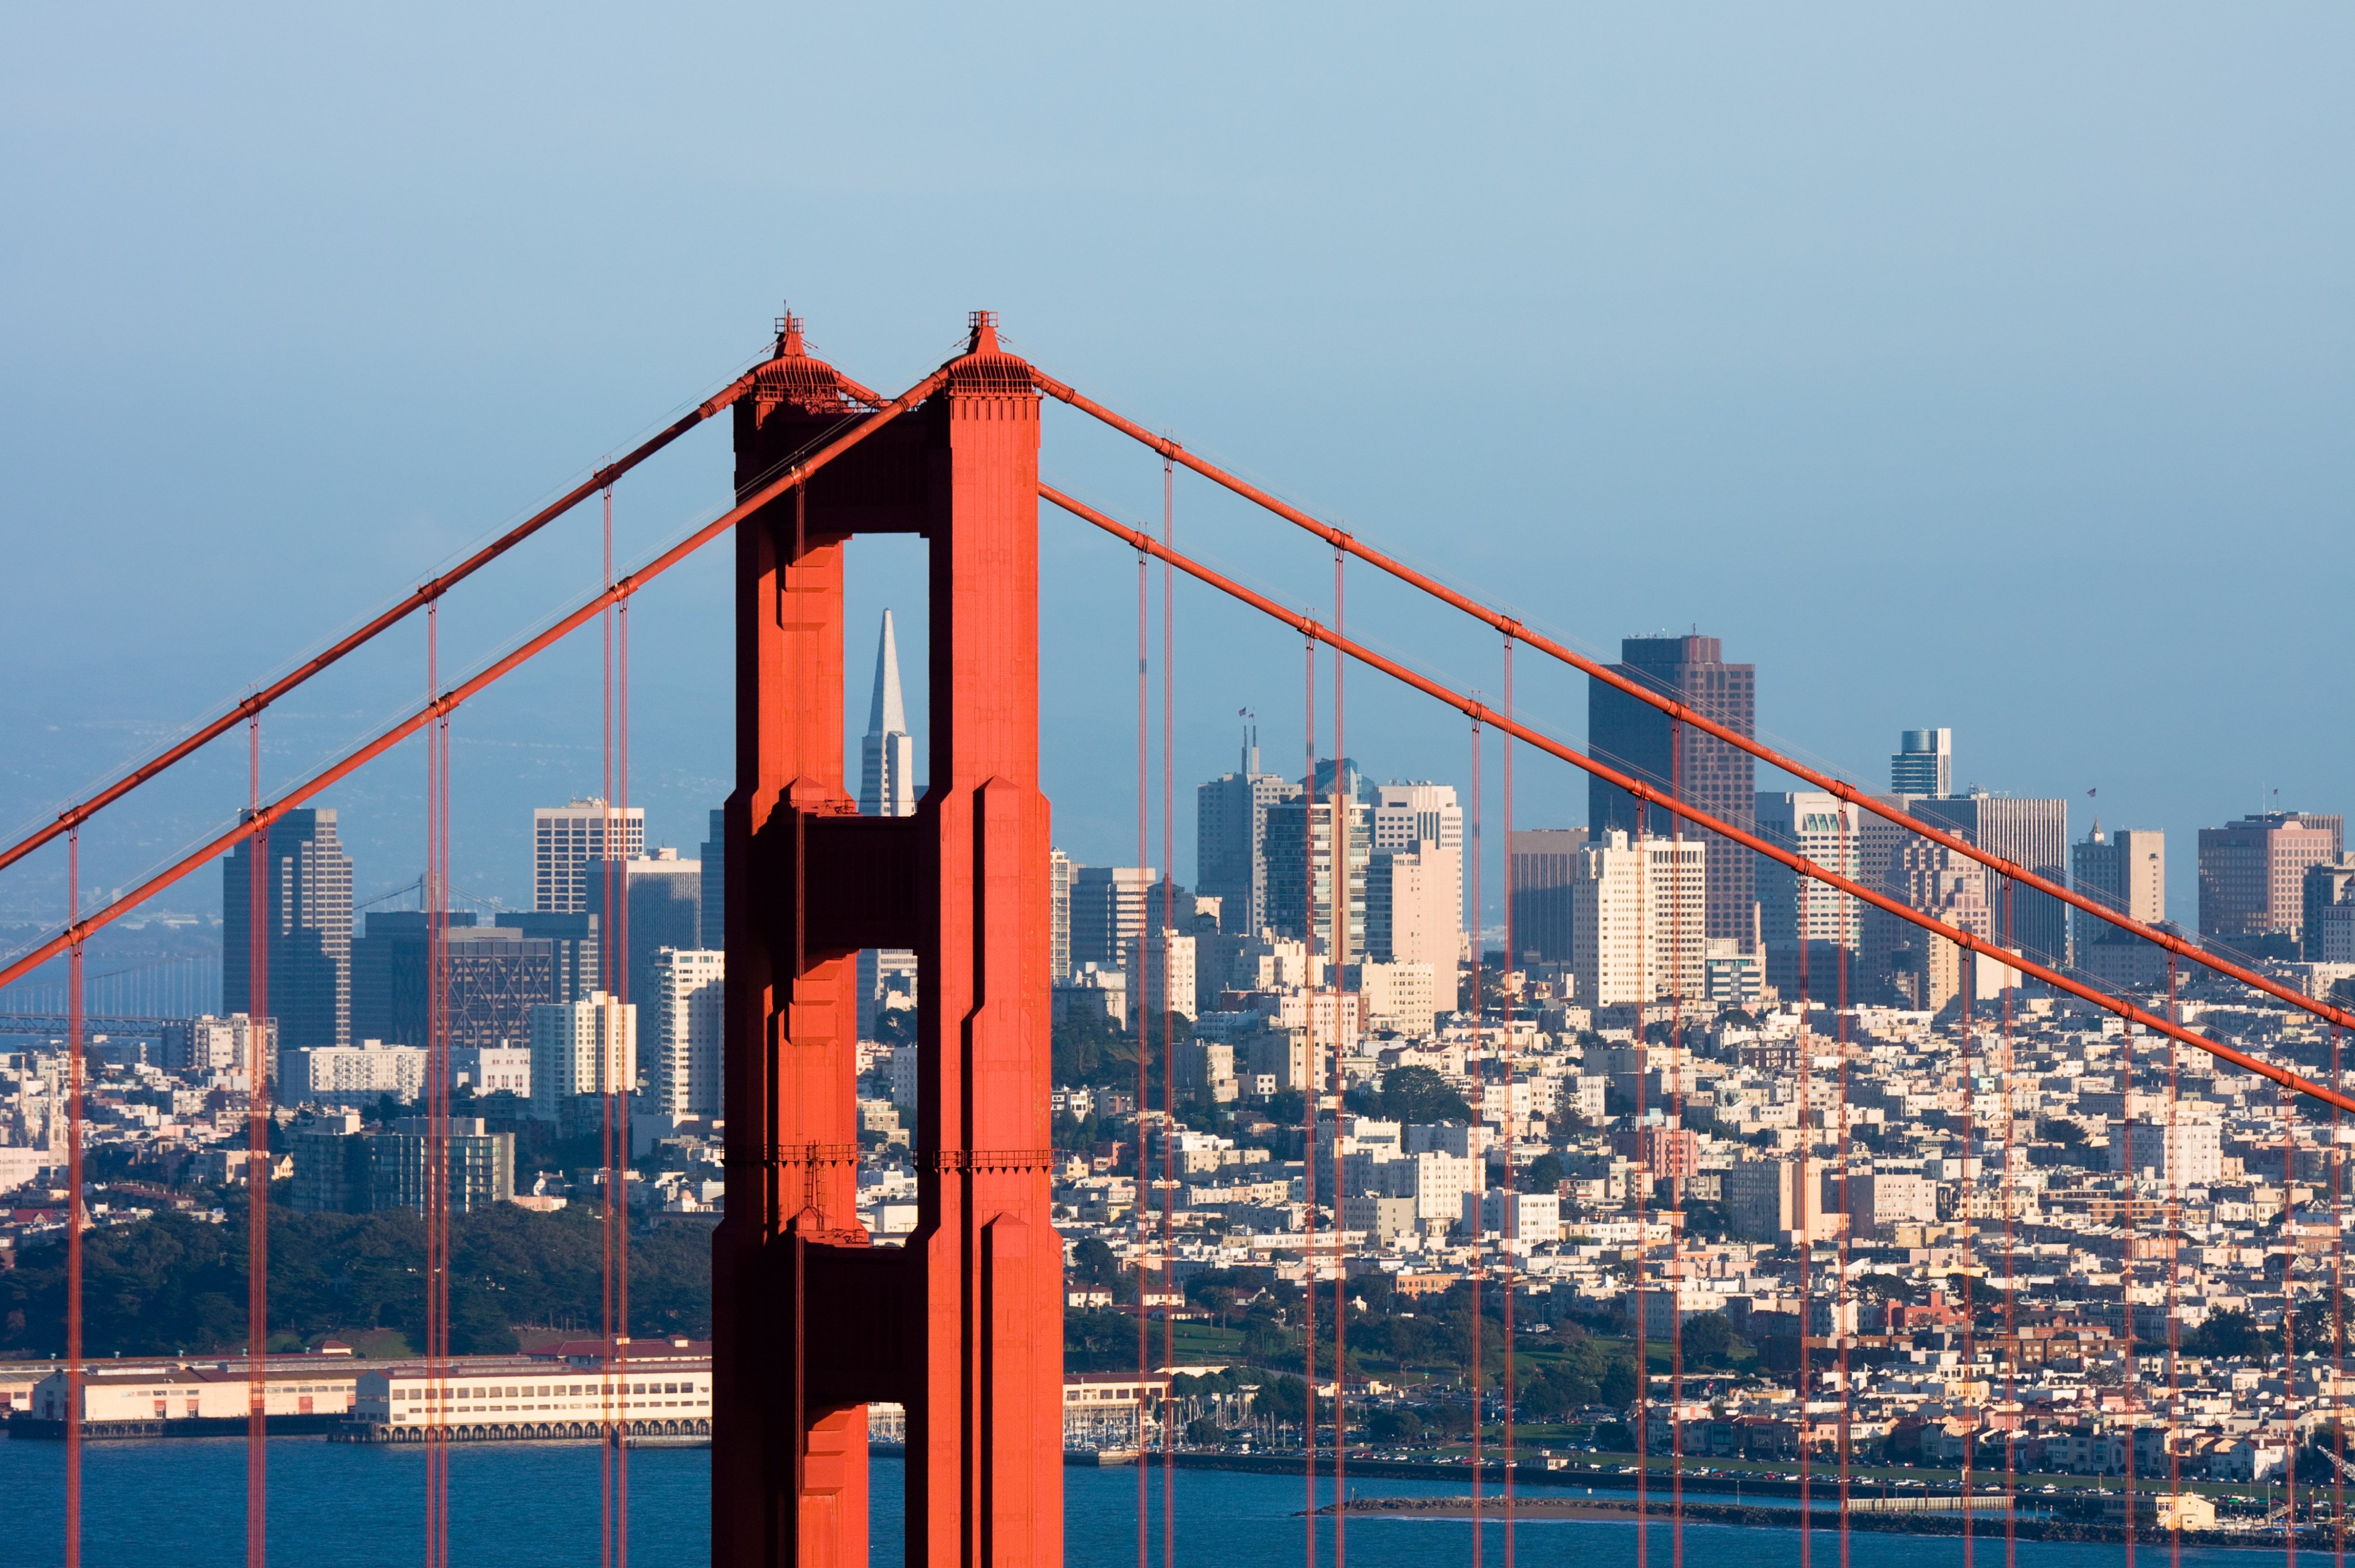 This year’s Apec summit will be held in San Francisco in mid-November. Photo: Shutterstock